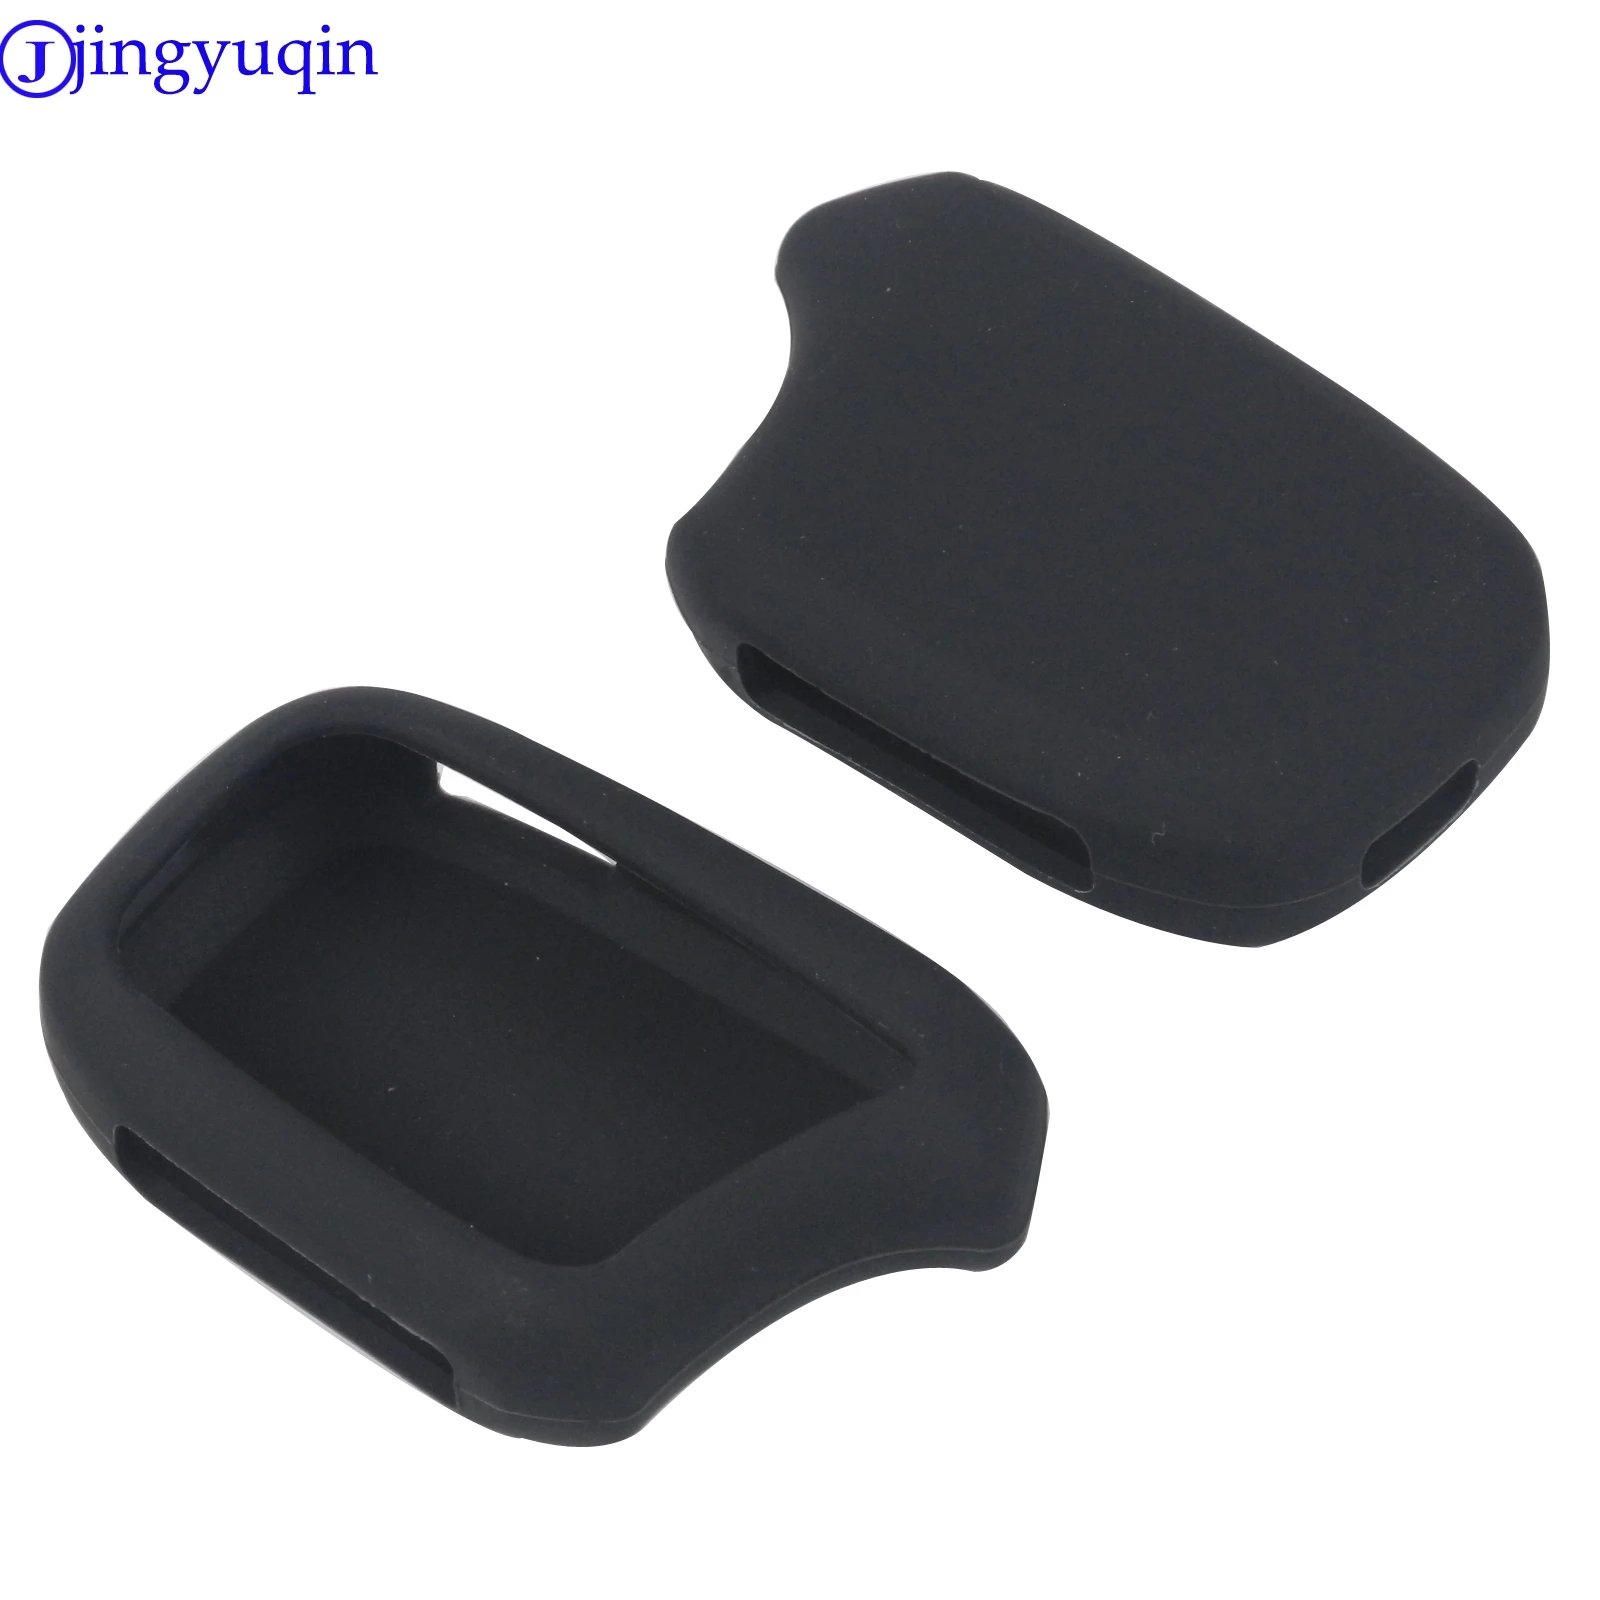 

jingyuqin Silicone Key Cover for MAGICAR KOREA Car Auto Security Alarm Two Way Remote Controller Rubber Key Case Car-styling